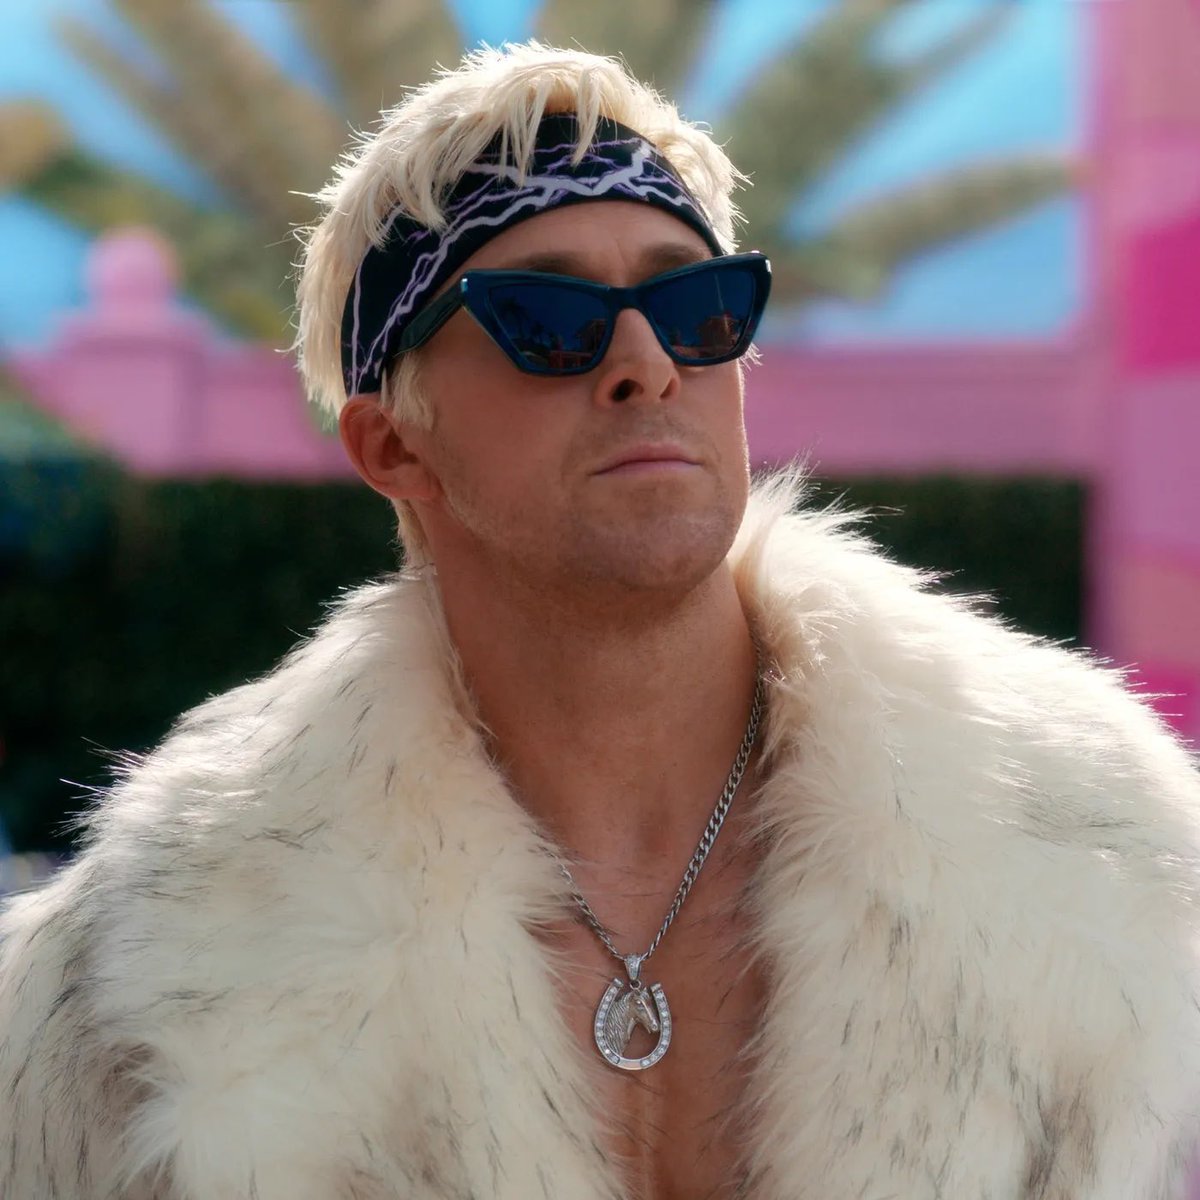 Ken learning about the Patriarchy and turning into Jake Paul is funny to me #BarbieMovie https://t.co/DNY02YgR4T